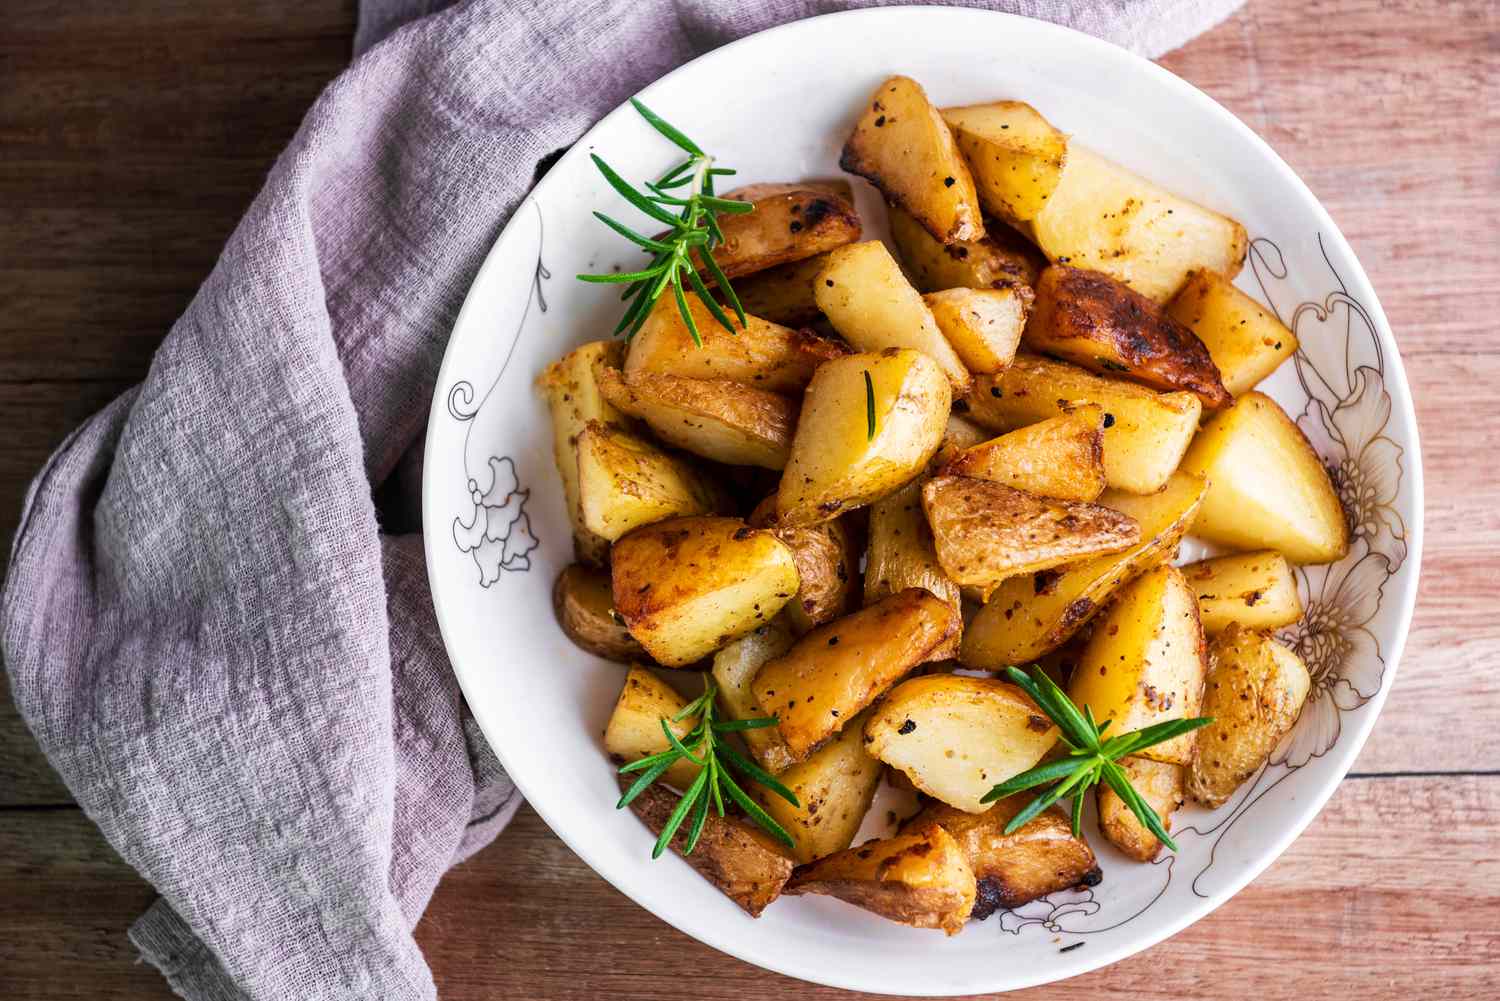 Why Are Potatoes Good for Your Health?